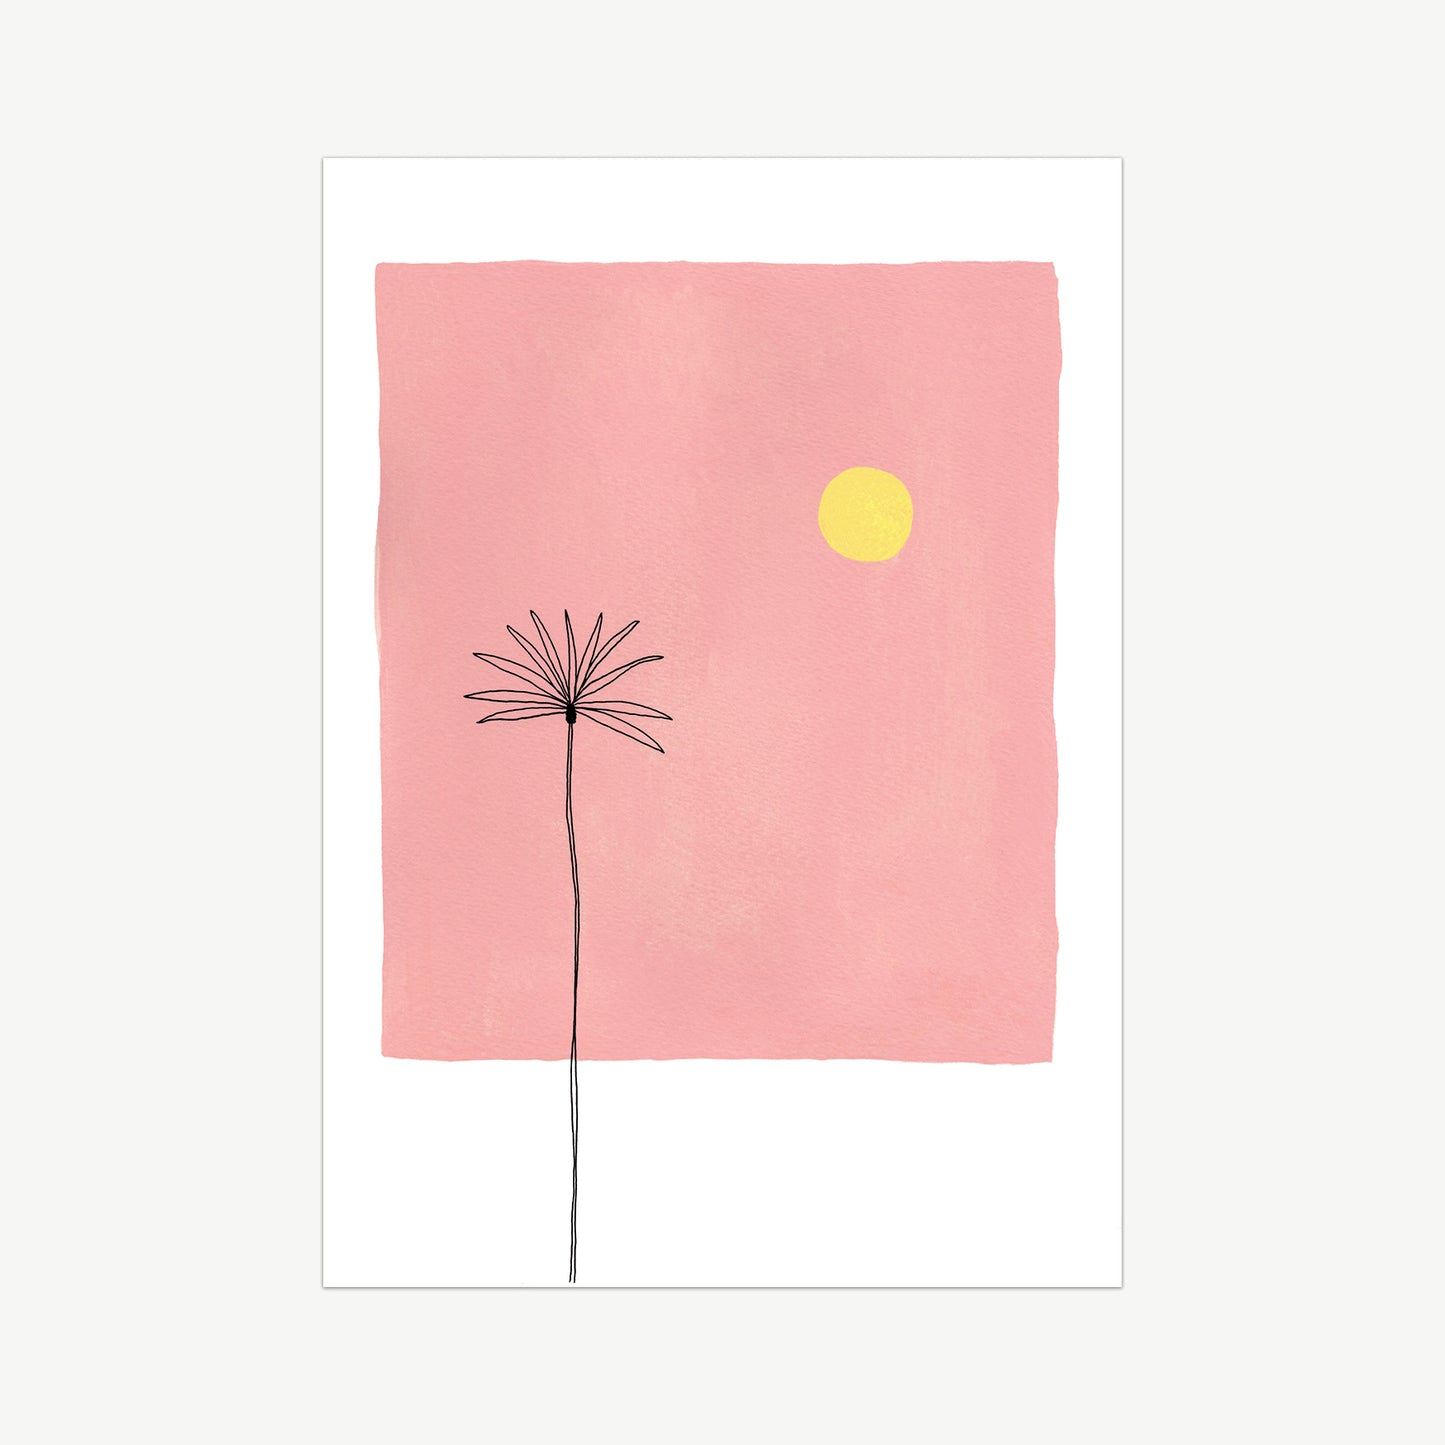 Pink Sunset with a yellow sun painted with gouache, with a black line drawing of a palm tree